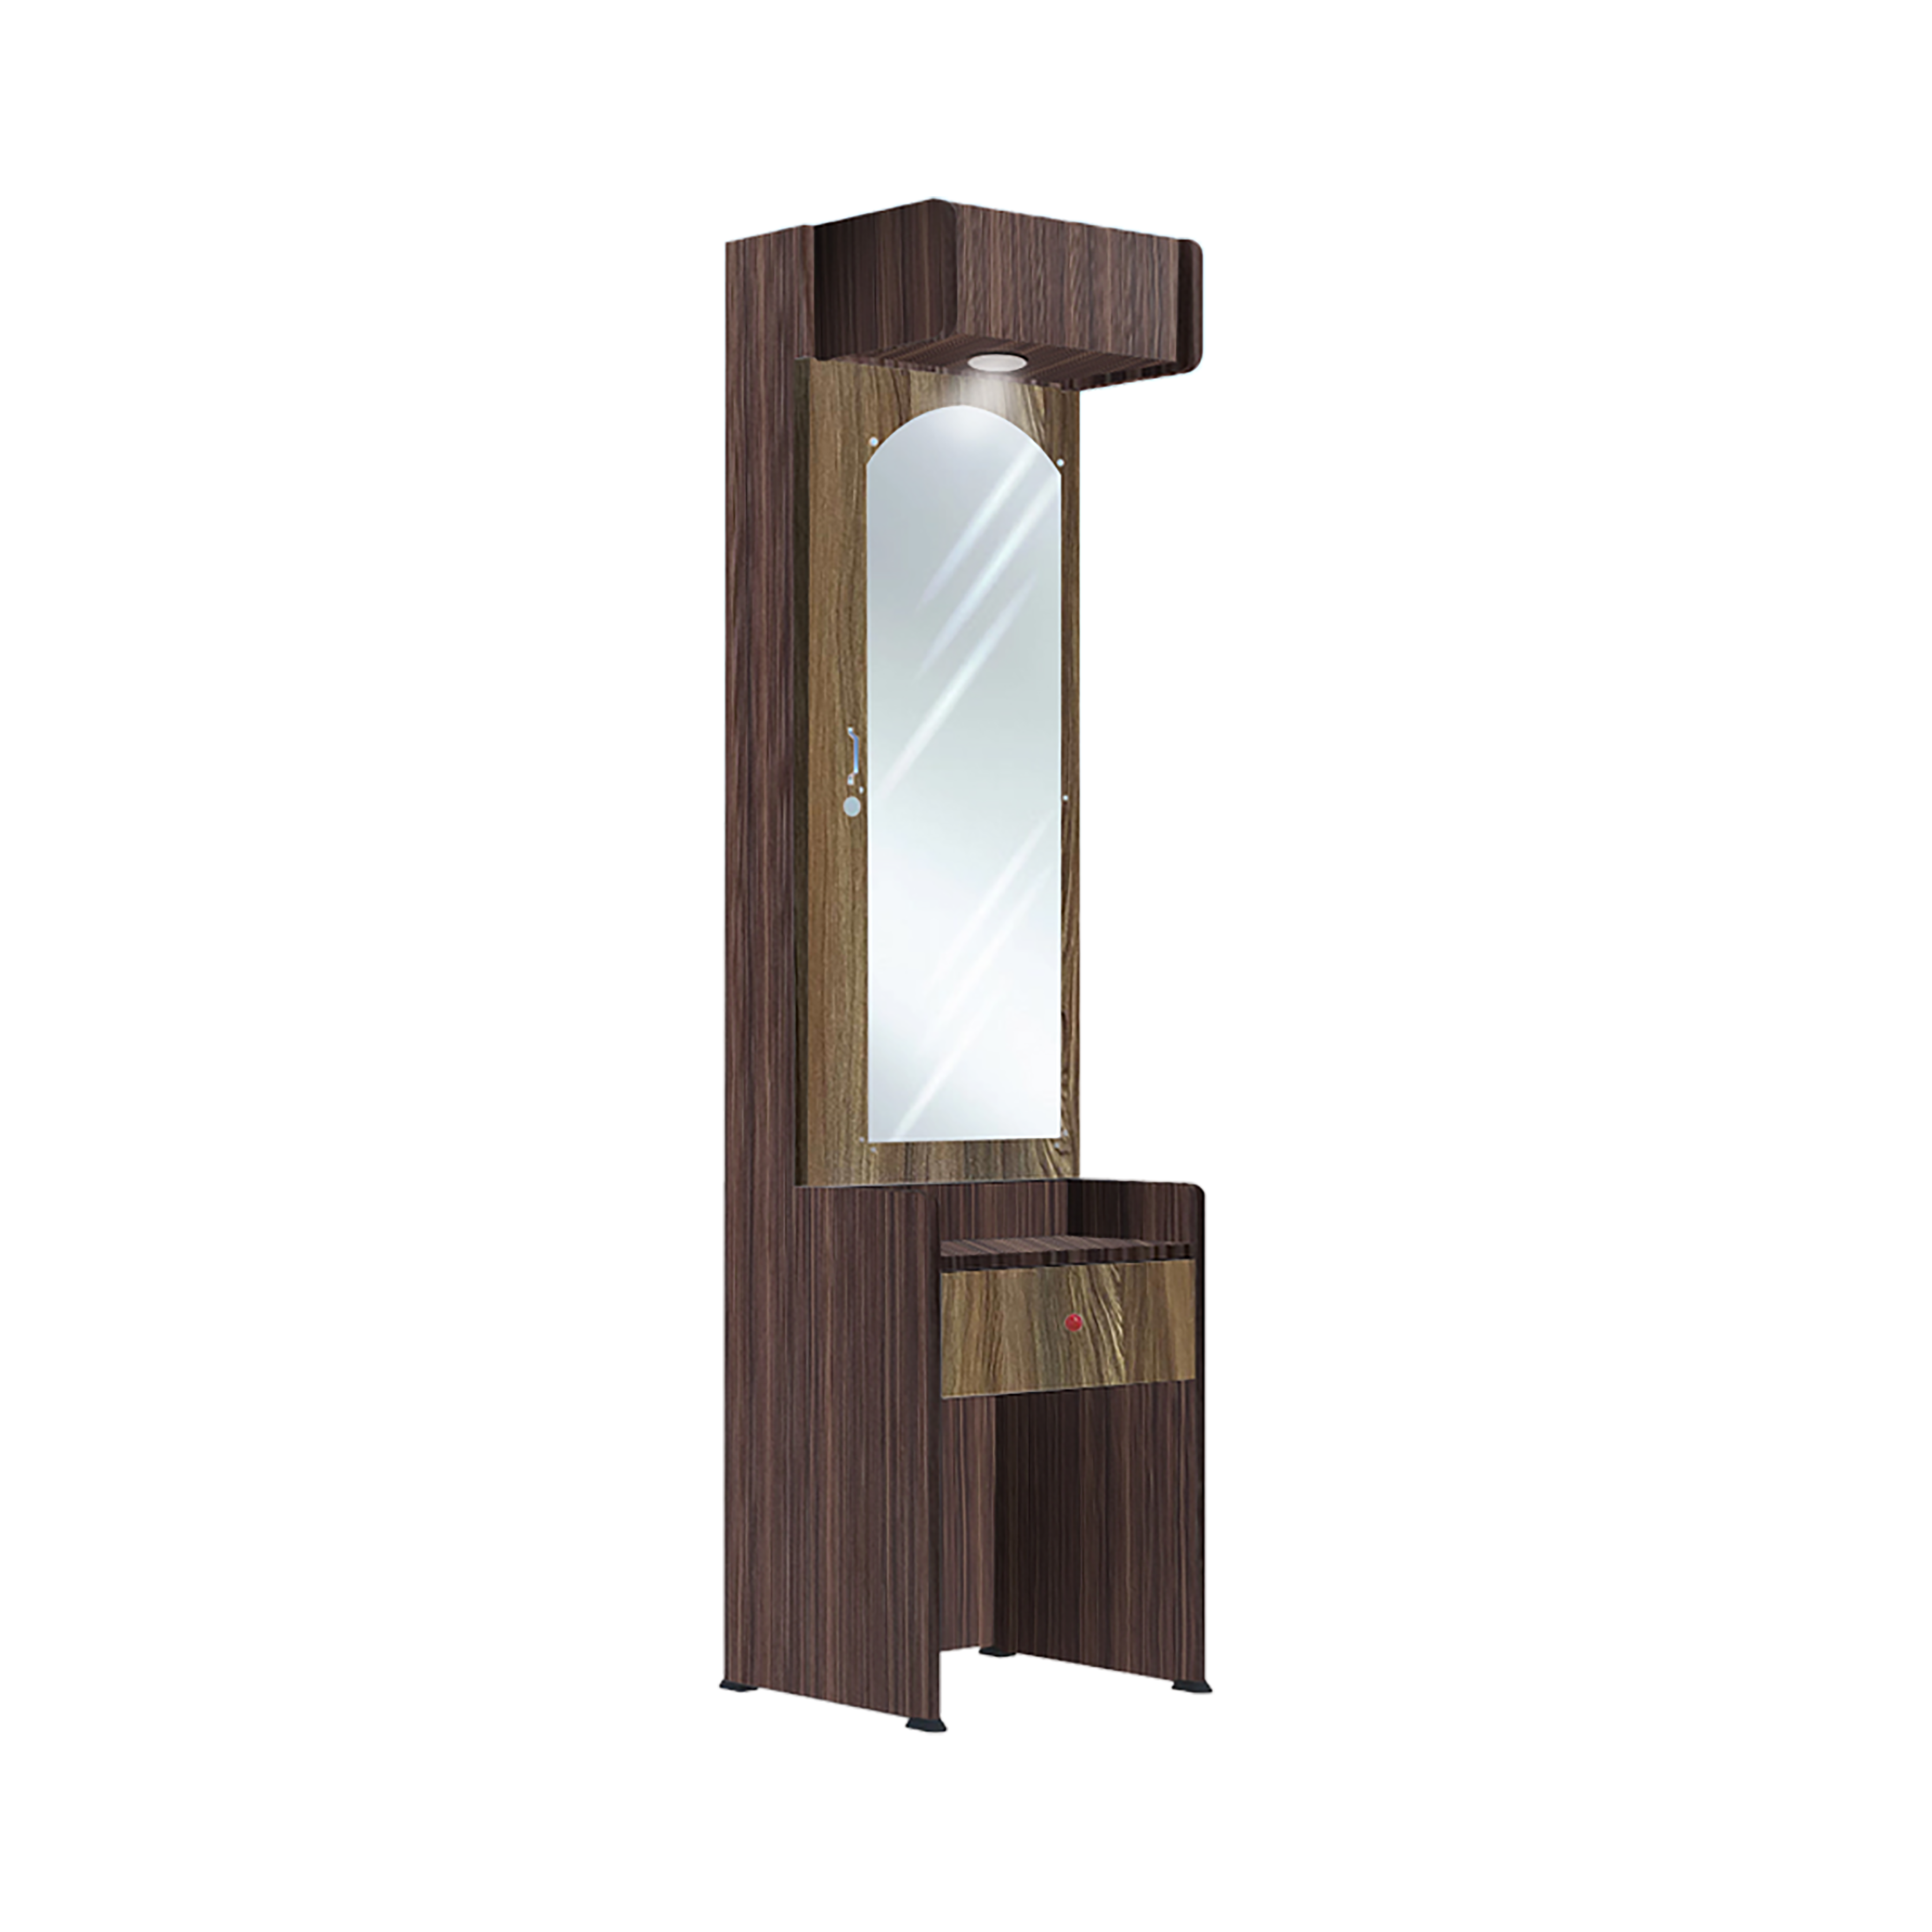 Dressing table - DT001